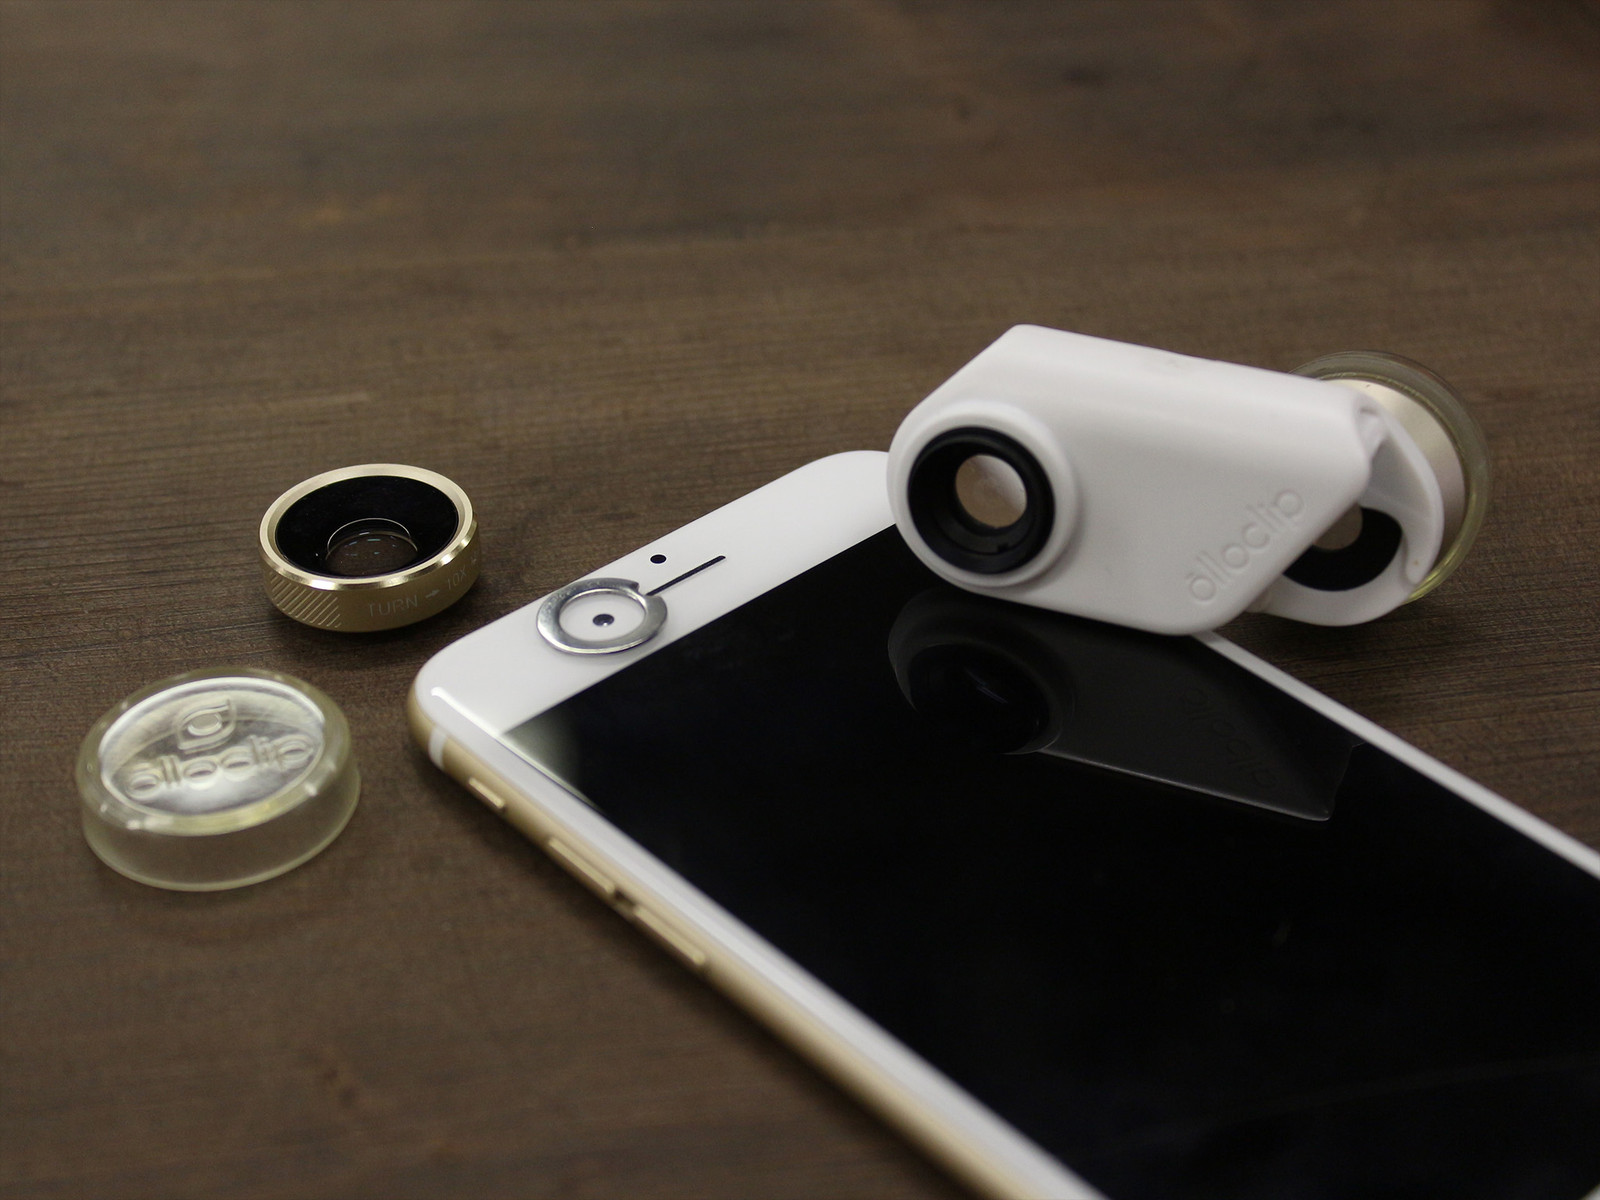 Iphone Lens Kits For Under $10 - Mobile Phone , HD Wallpaper & Backgrounds